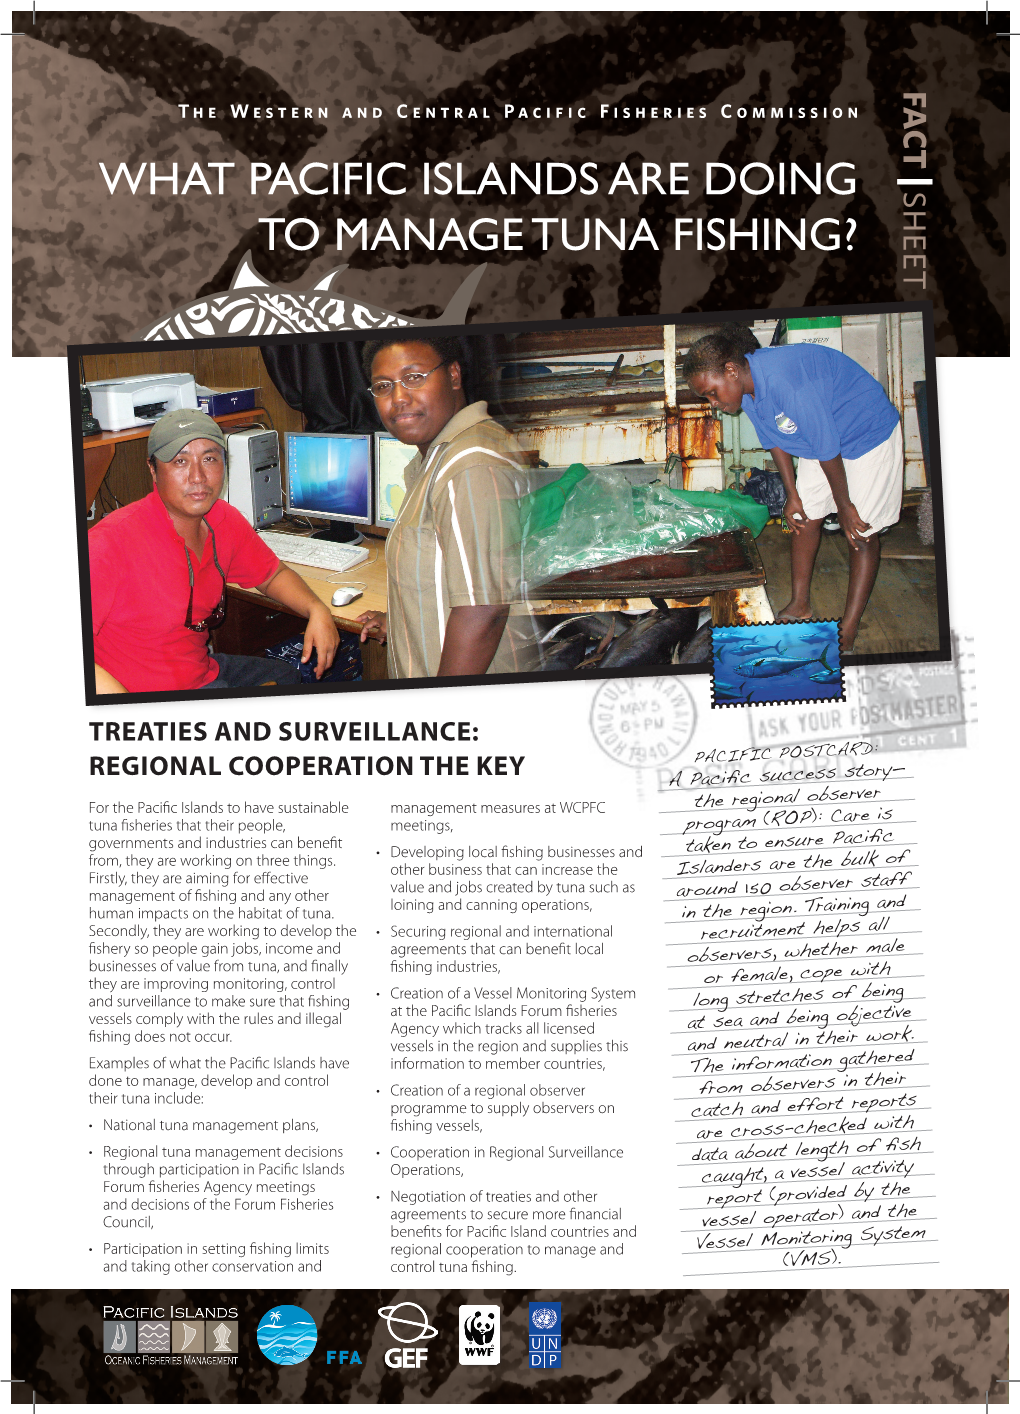 What Pacific Islands Are Doing to Manage Tuna Fishing?